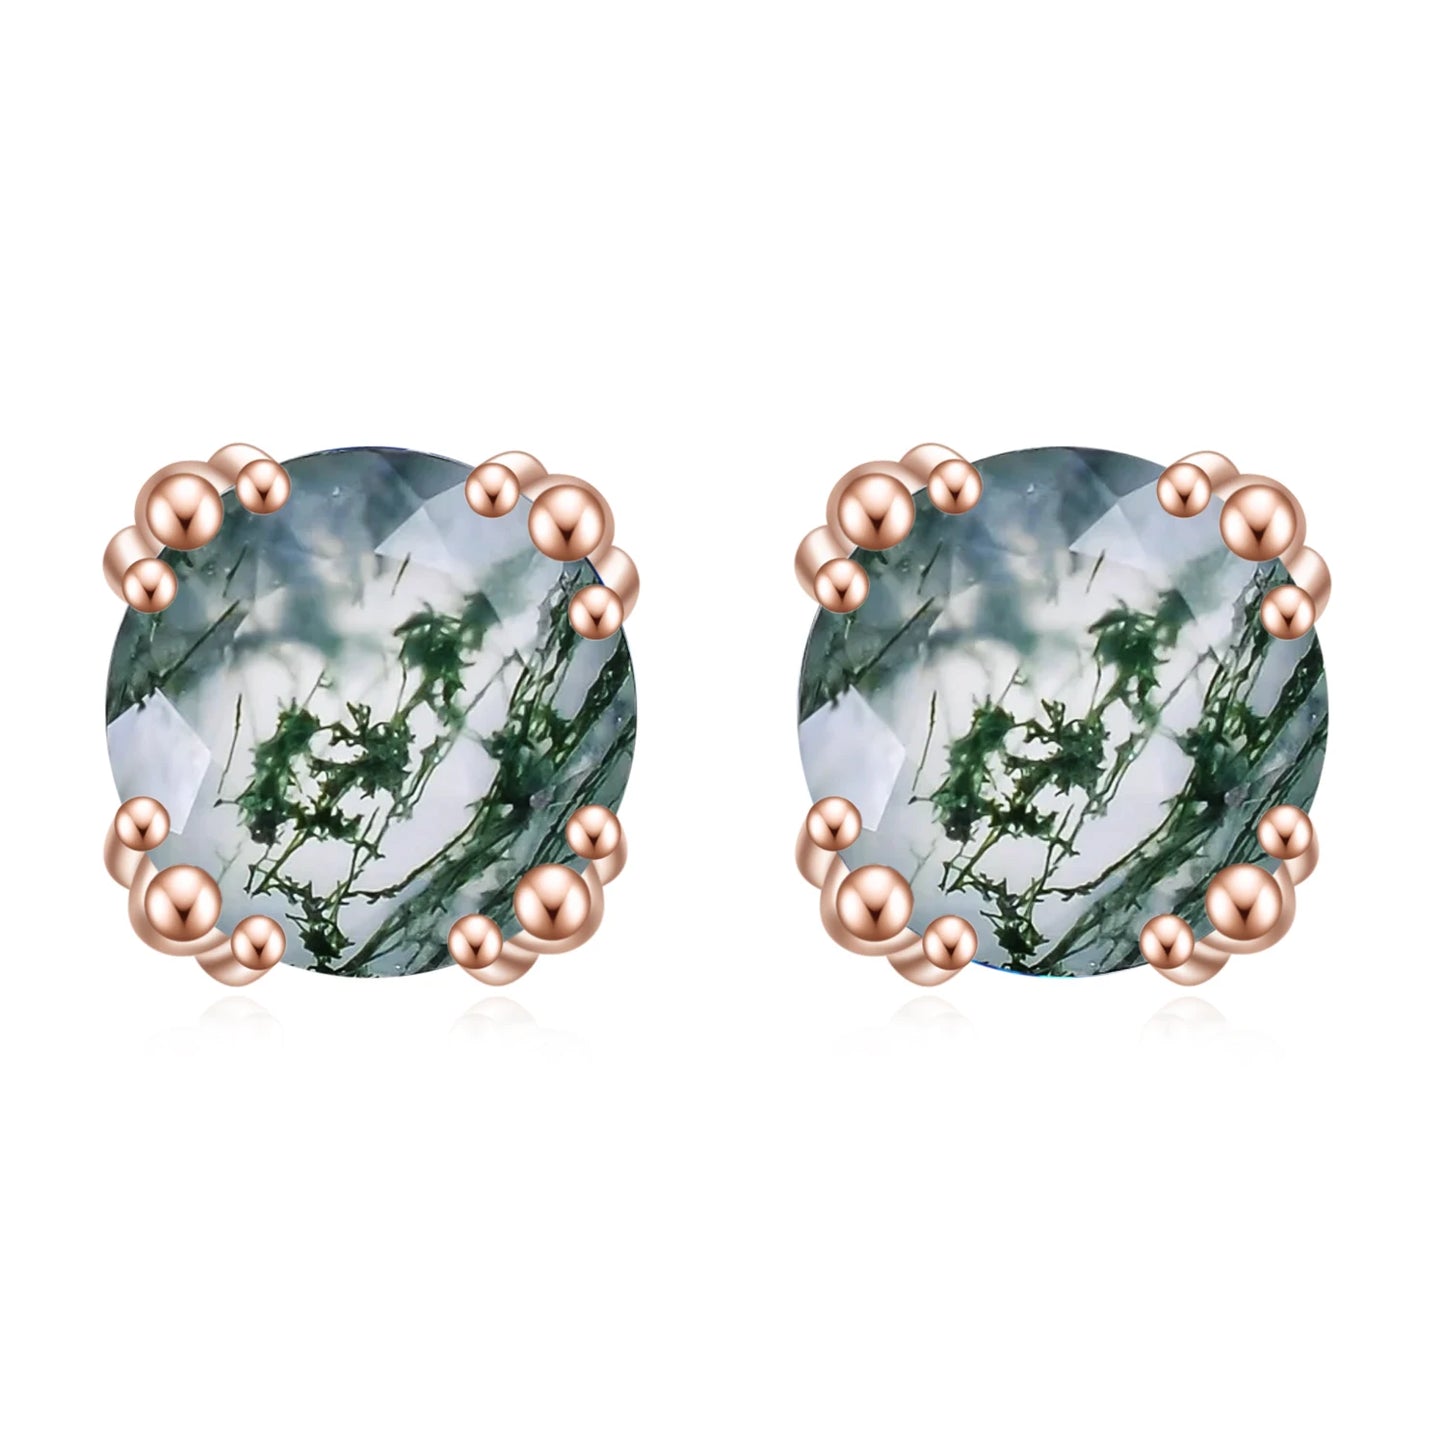 GEM'S BALLET Unique 1.0Ct 6mm Round Cut Moss Agate Claw Prongs Studs Earrings in 925 Sterling Silver Women's Wedding Earrings Moss Agate 925 Sterling Silver CHINA